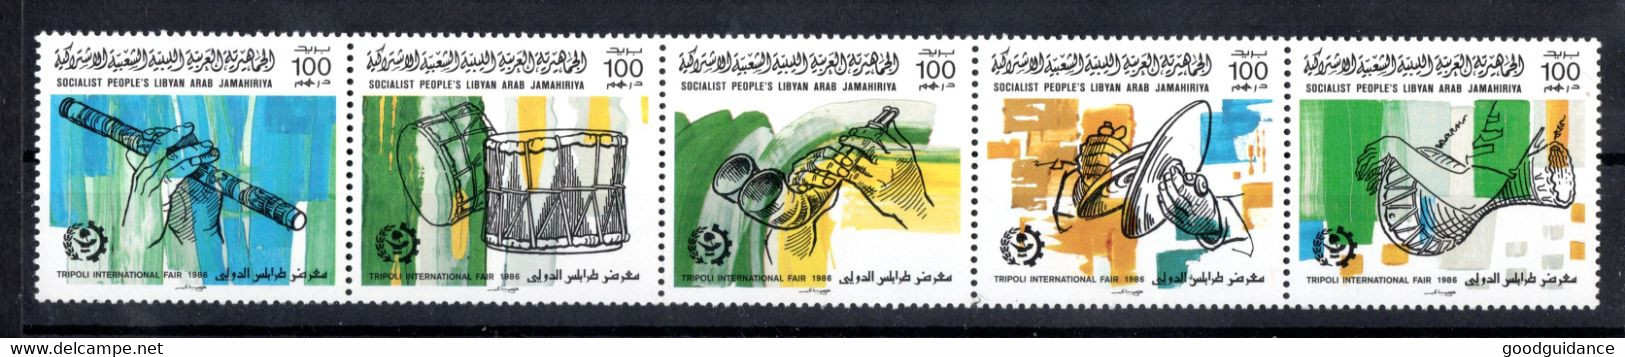 1986 - Libya - The 24th International Trade Fair, Tripoli - Musical Instruments - Strip Of 5 Stamps - MNH** - Libia